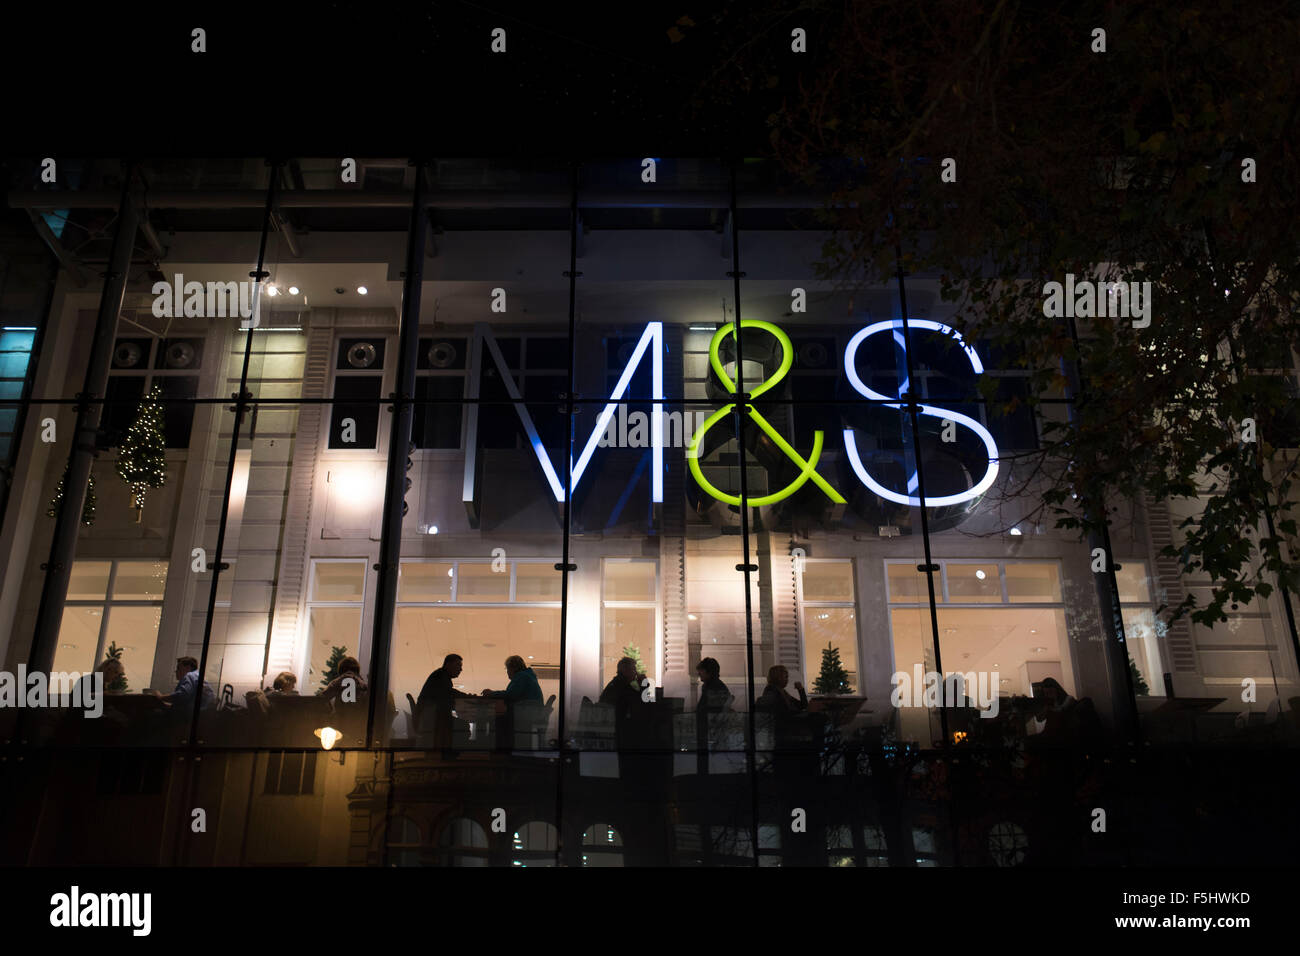 A Mark's and Spencers (M&S) retail store at night. Stock Photo